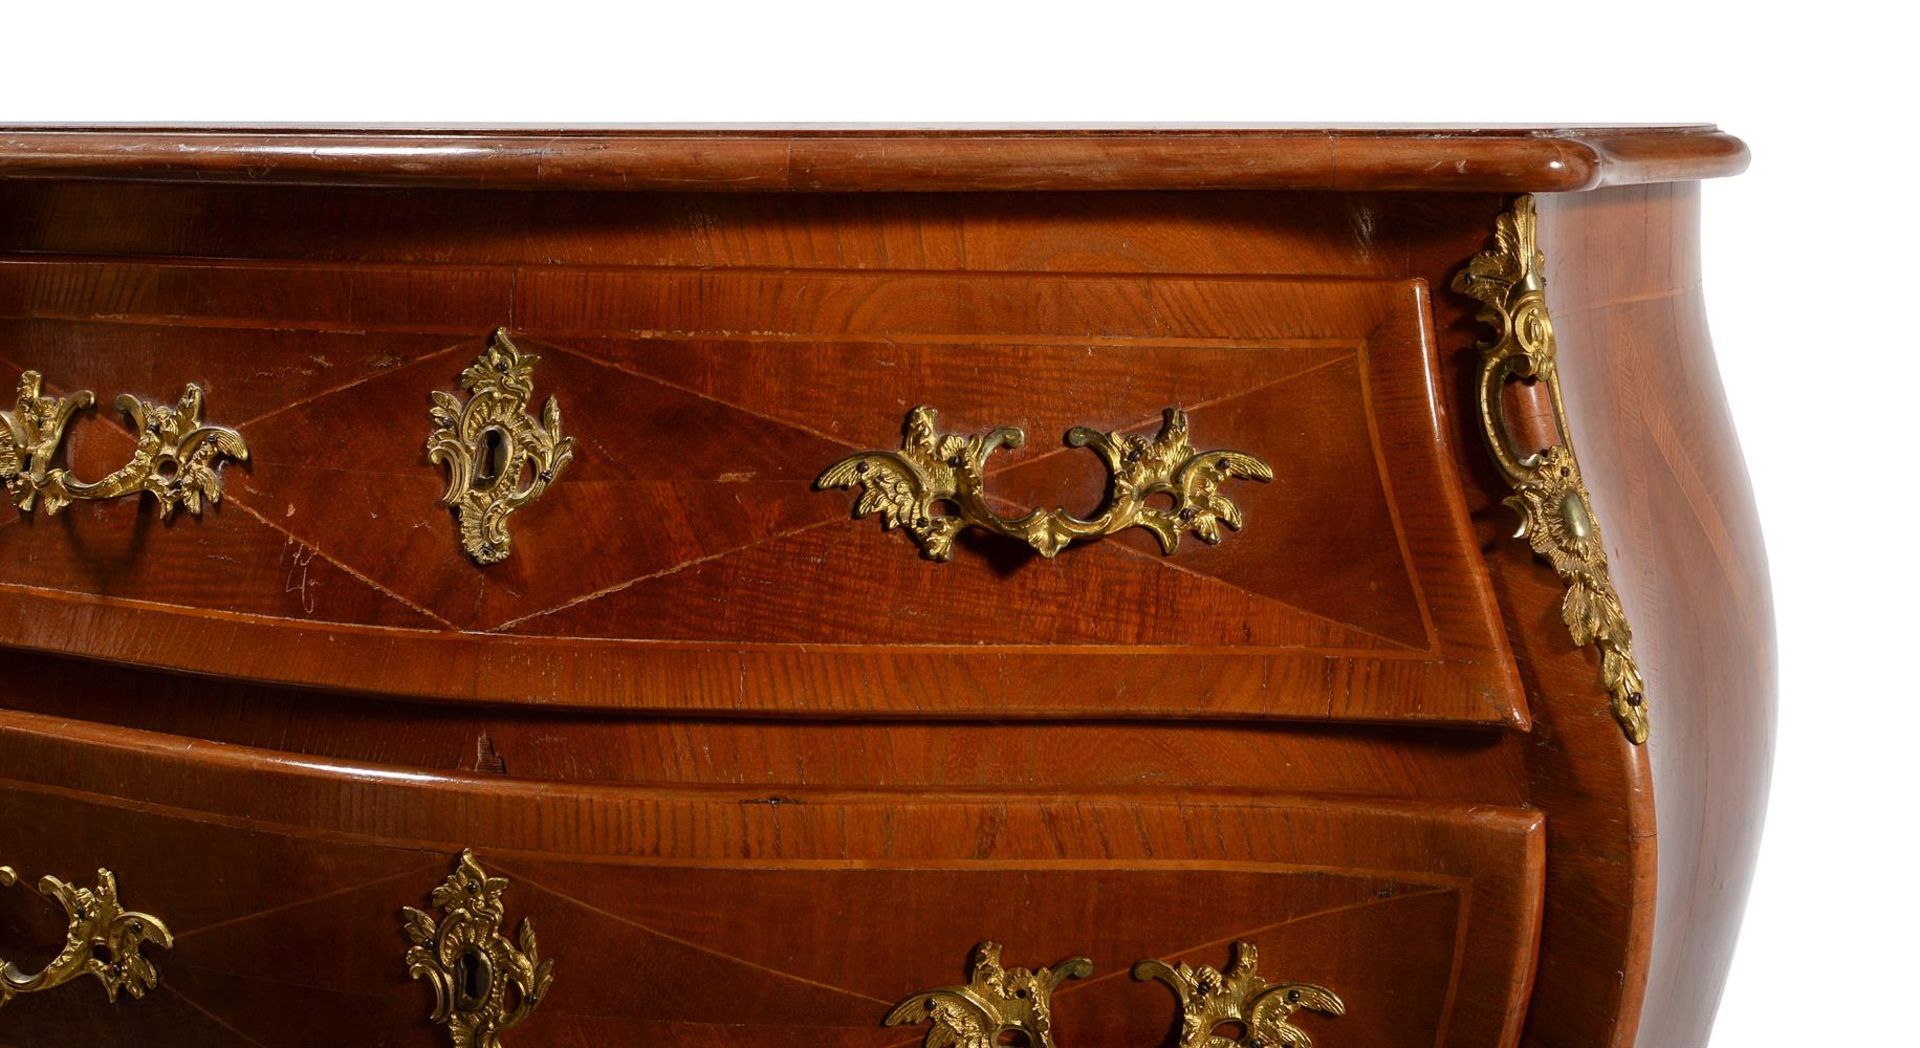 Y A French chestnut and kingwood banded commode in Louis XV/XVI transitional style - Image 2 of 4